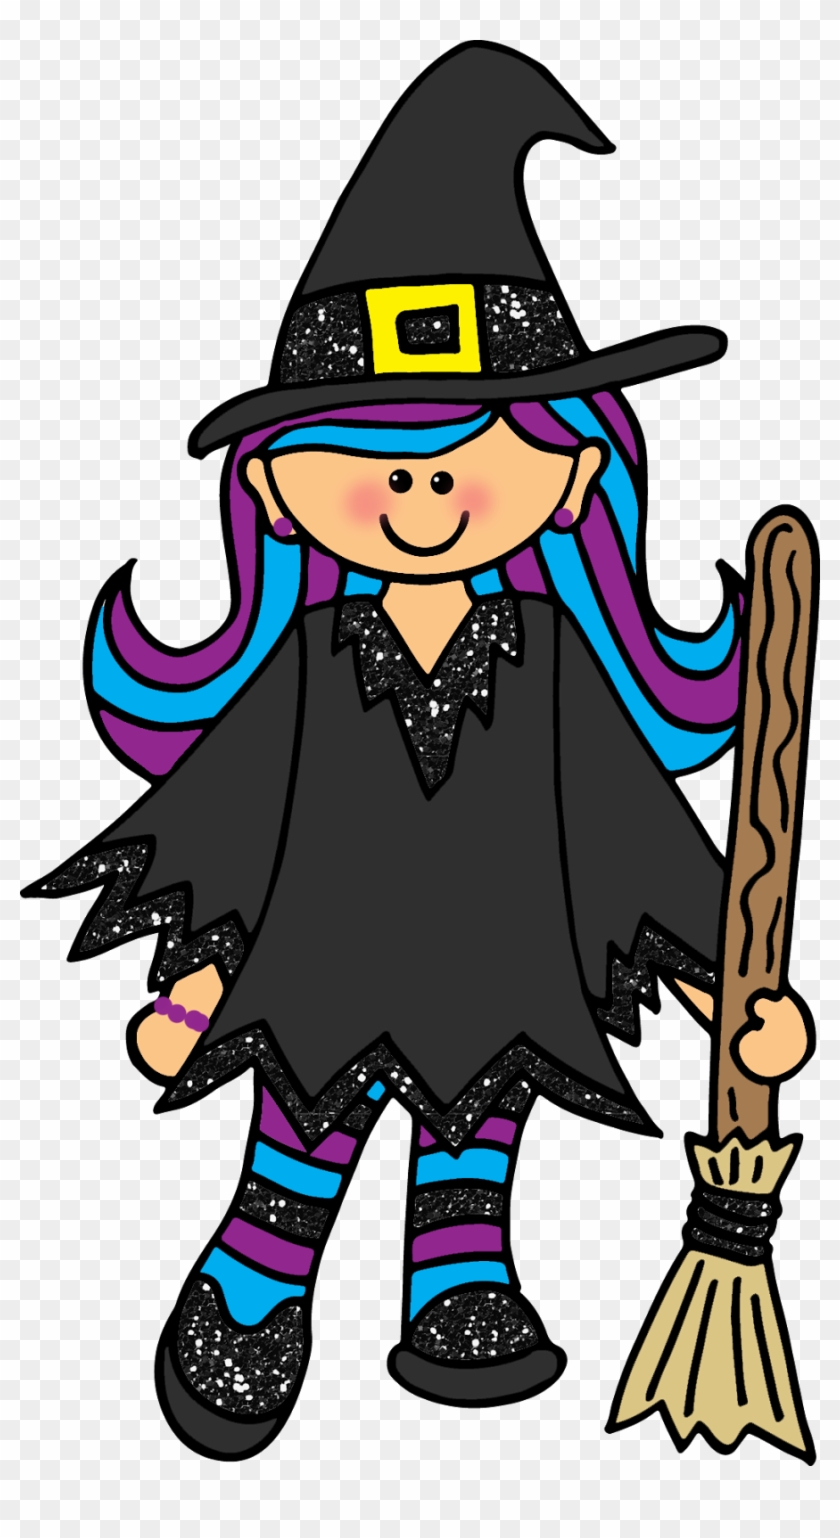 Friendly witch clipart.